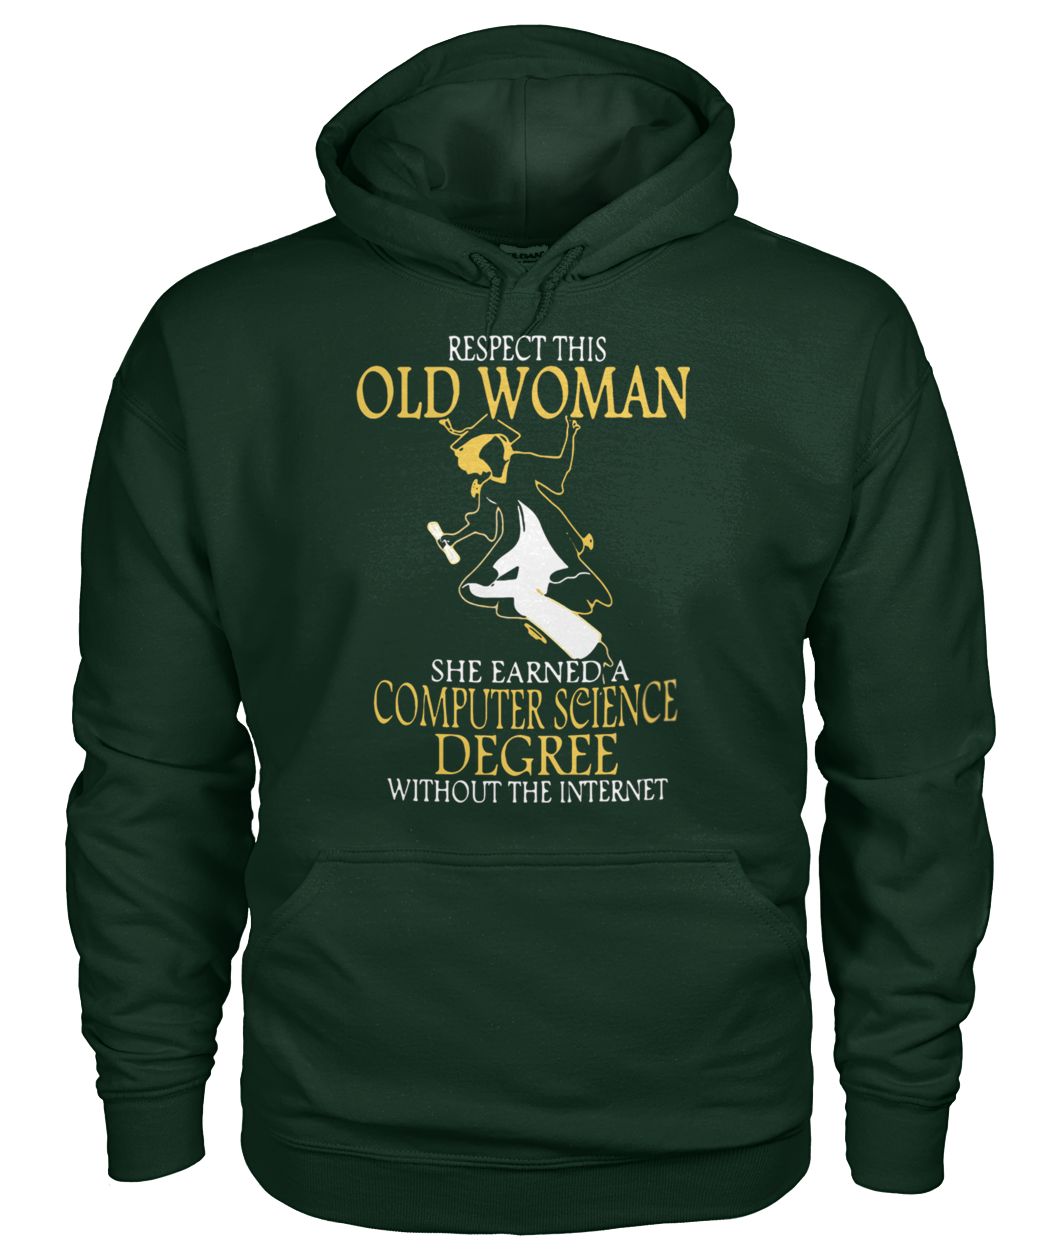 Respect this old woman she earned a computer science degree without the internet gildan hoodie